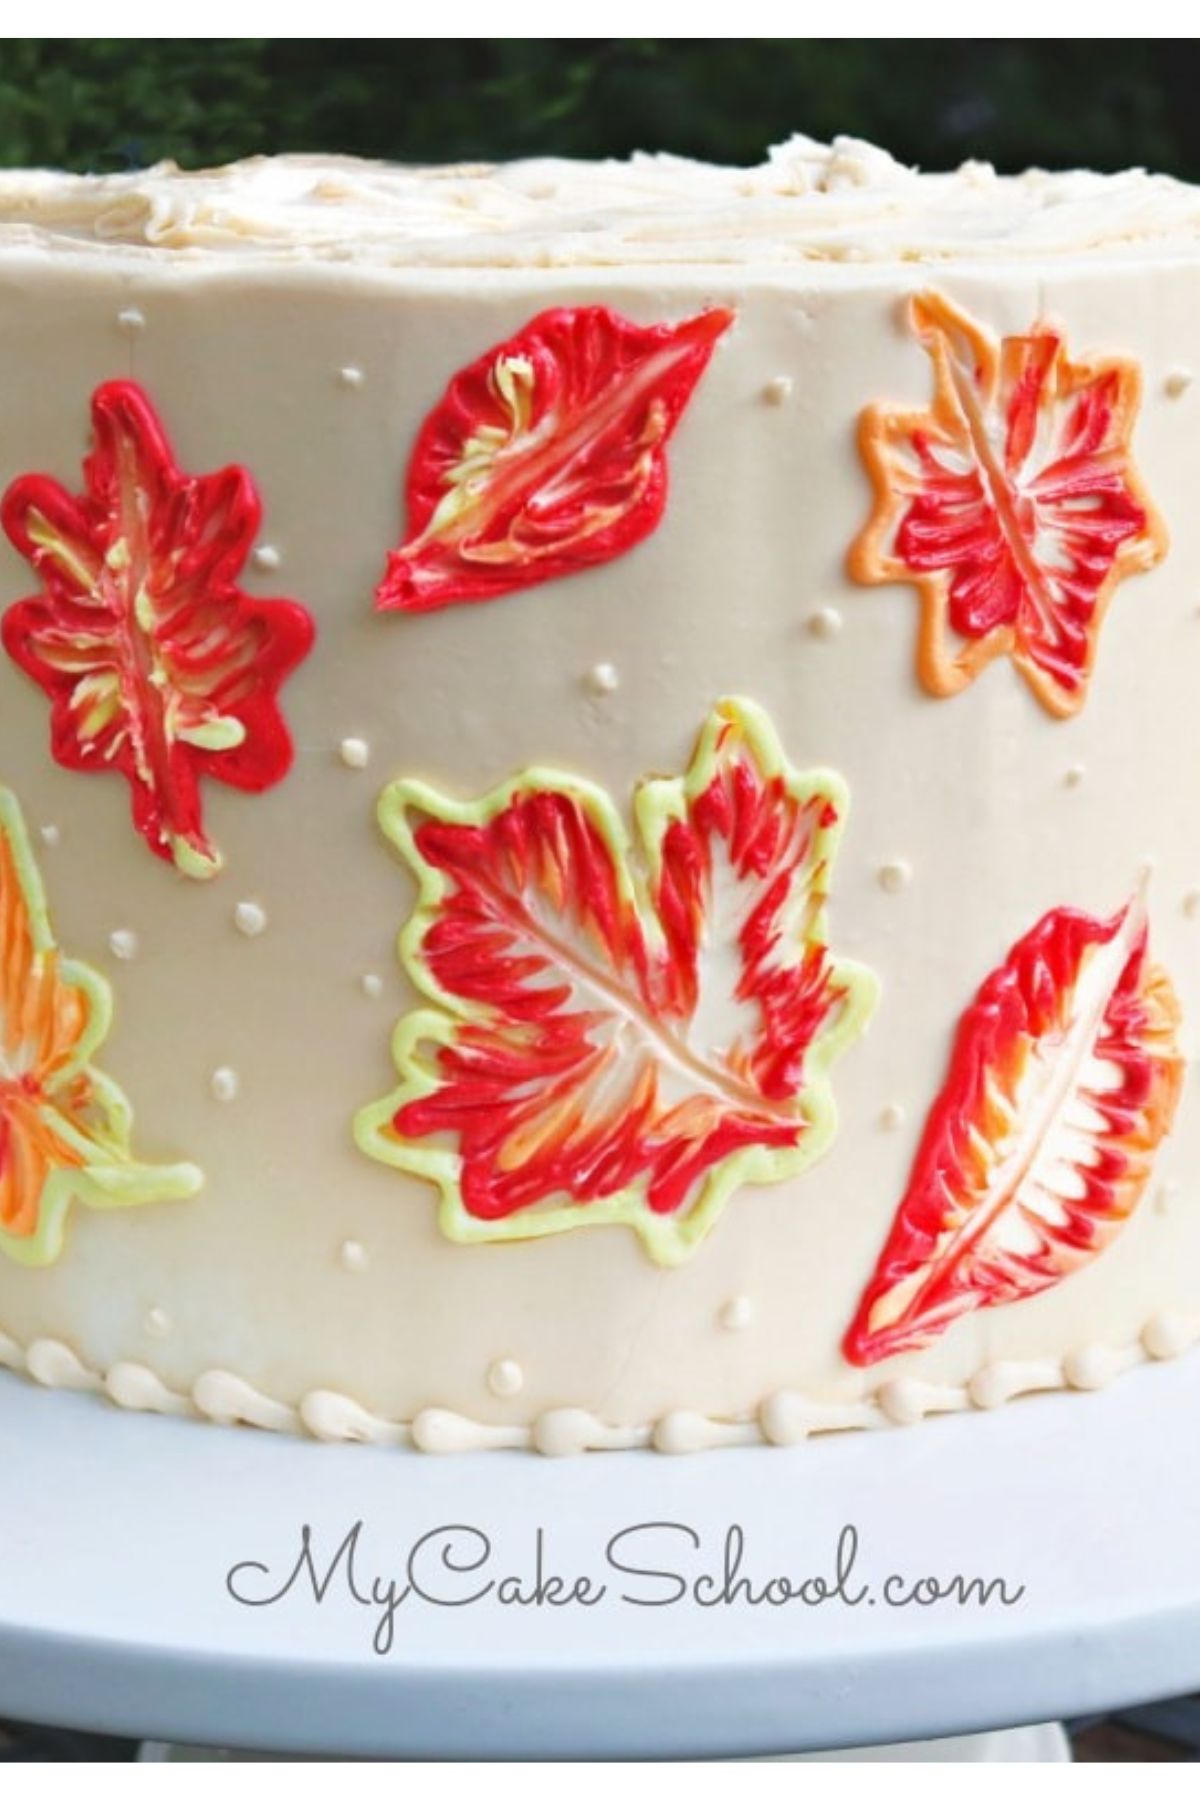 Closeup of finished Brush Embroidery Leaves cake, featuring brightly colored orange, yellow, and red leaves.